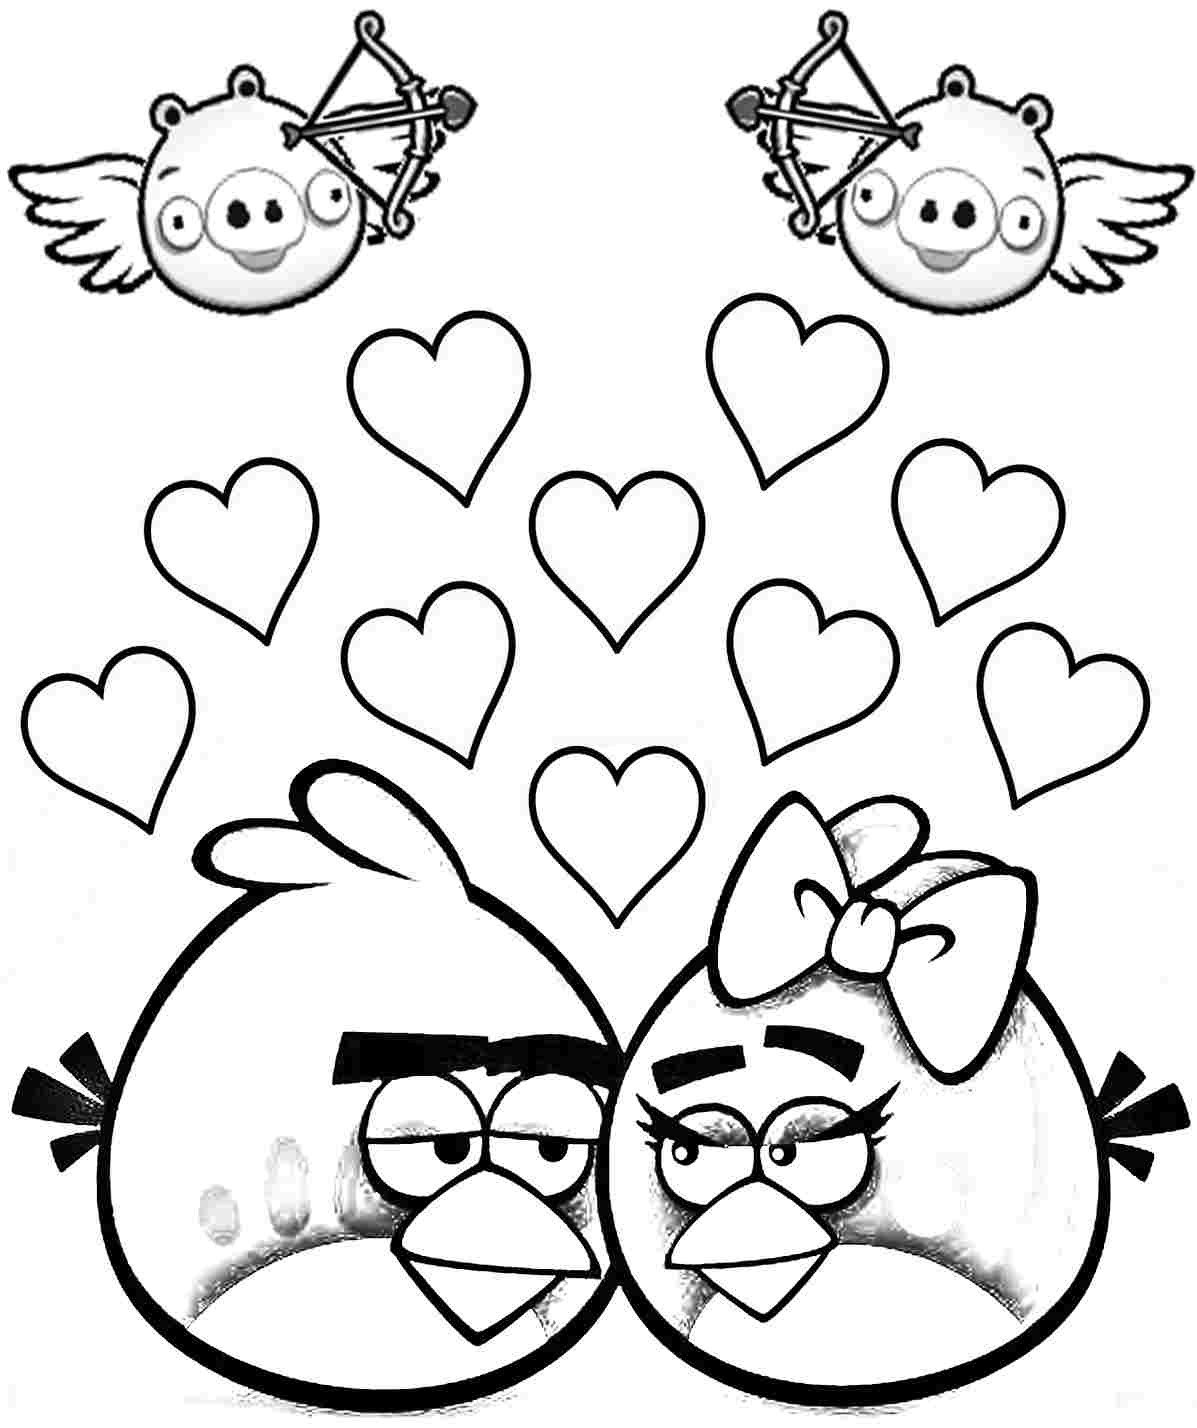 Coloring Pages For Boys Valentines
 Valentines Day Coloring Pages For Boys at GetColorings